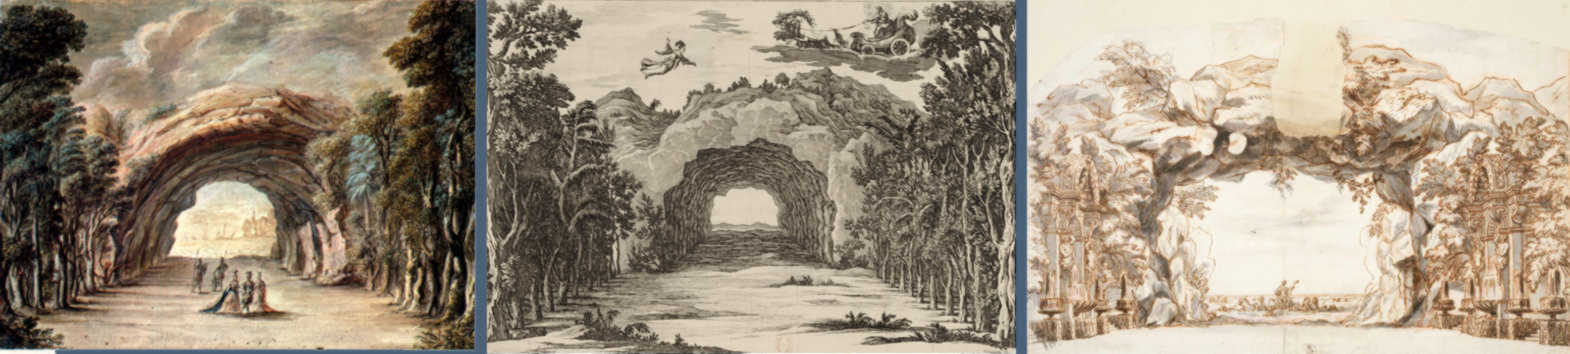 Landscape with cave